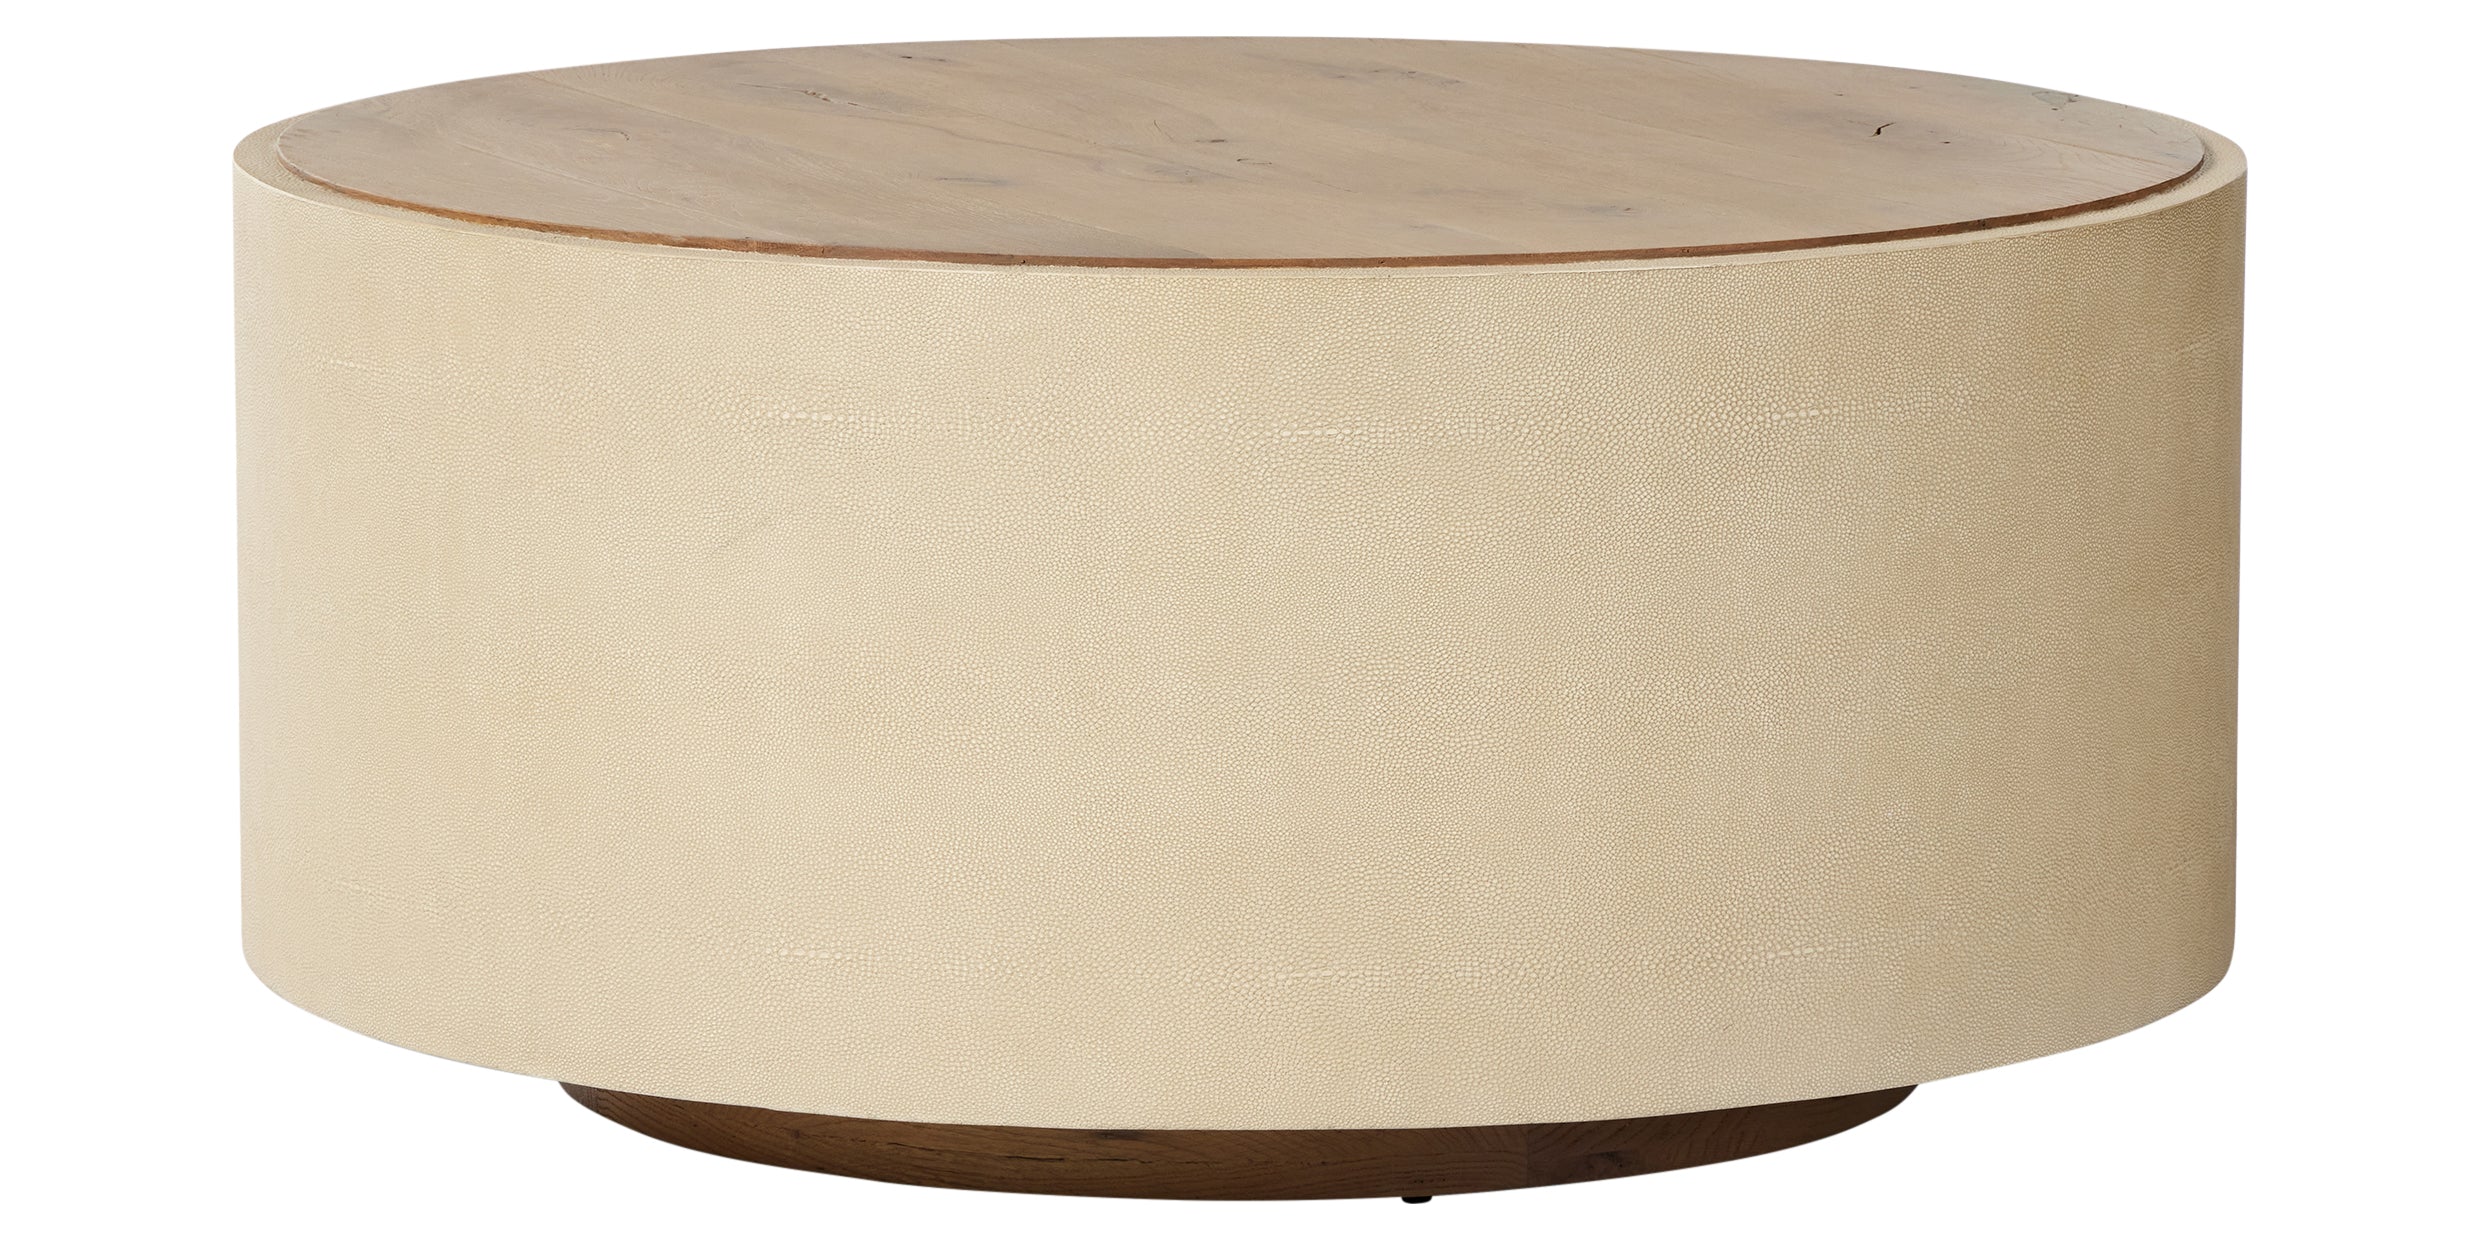 Natural Resawn Oak &amp; Light Cream Shagreen with Natural Solid Oak | Crosby Round Coffee Table | Valley Ridge Furniture